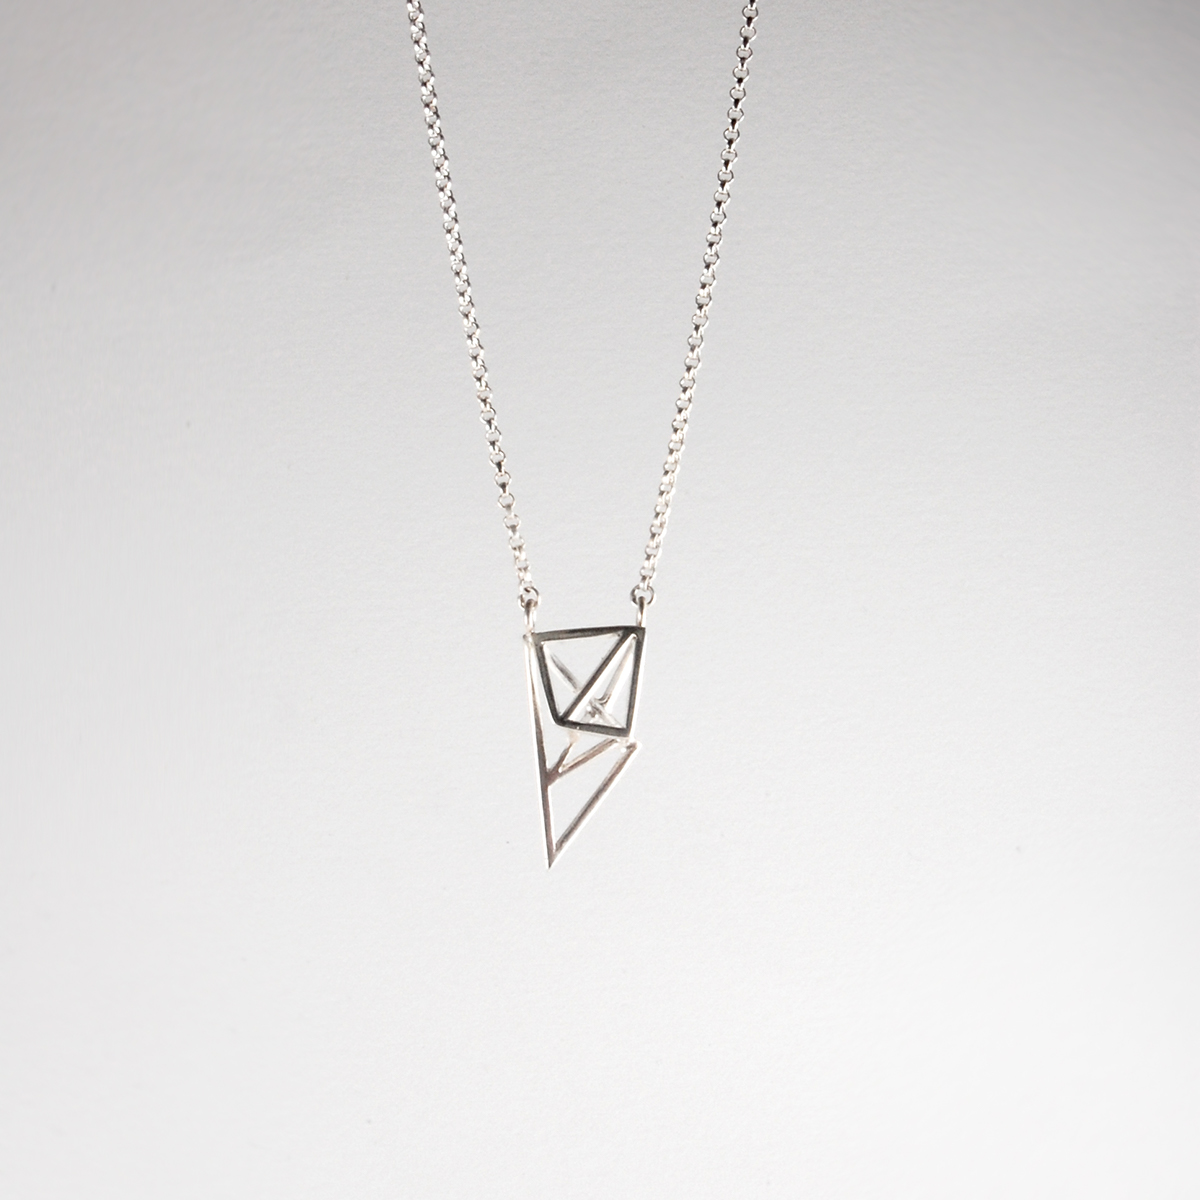 geometry sculpture lost wax casting Investment sterling silver Necklace